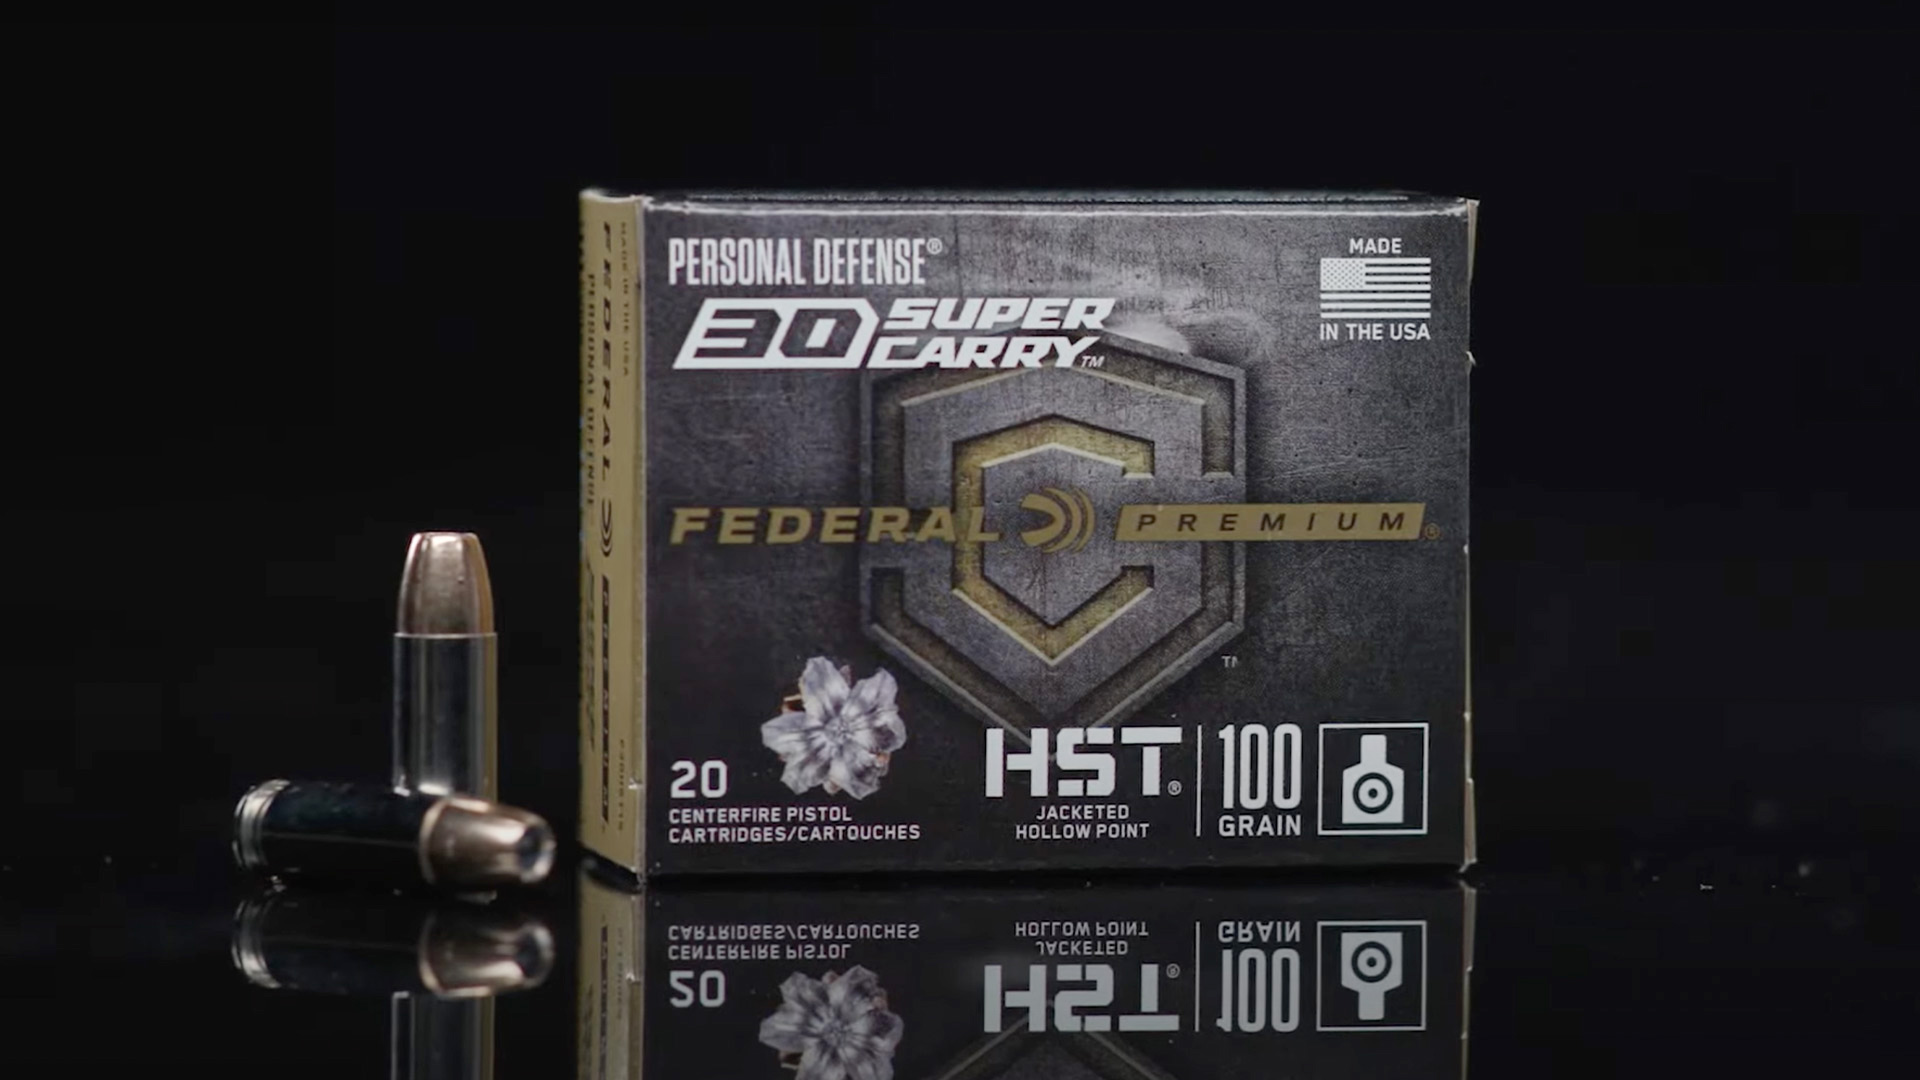 First Look: Federal 30 Super Carry HST | An Official Journal Of The NRA